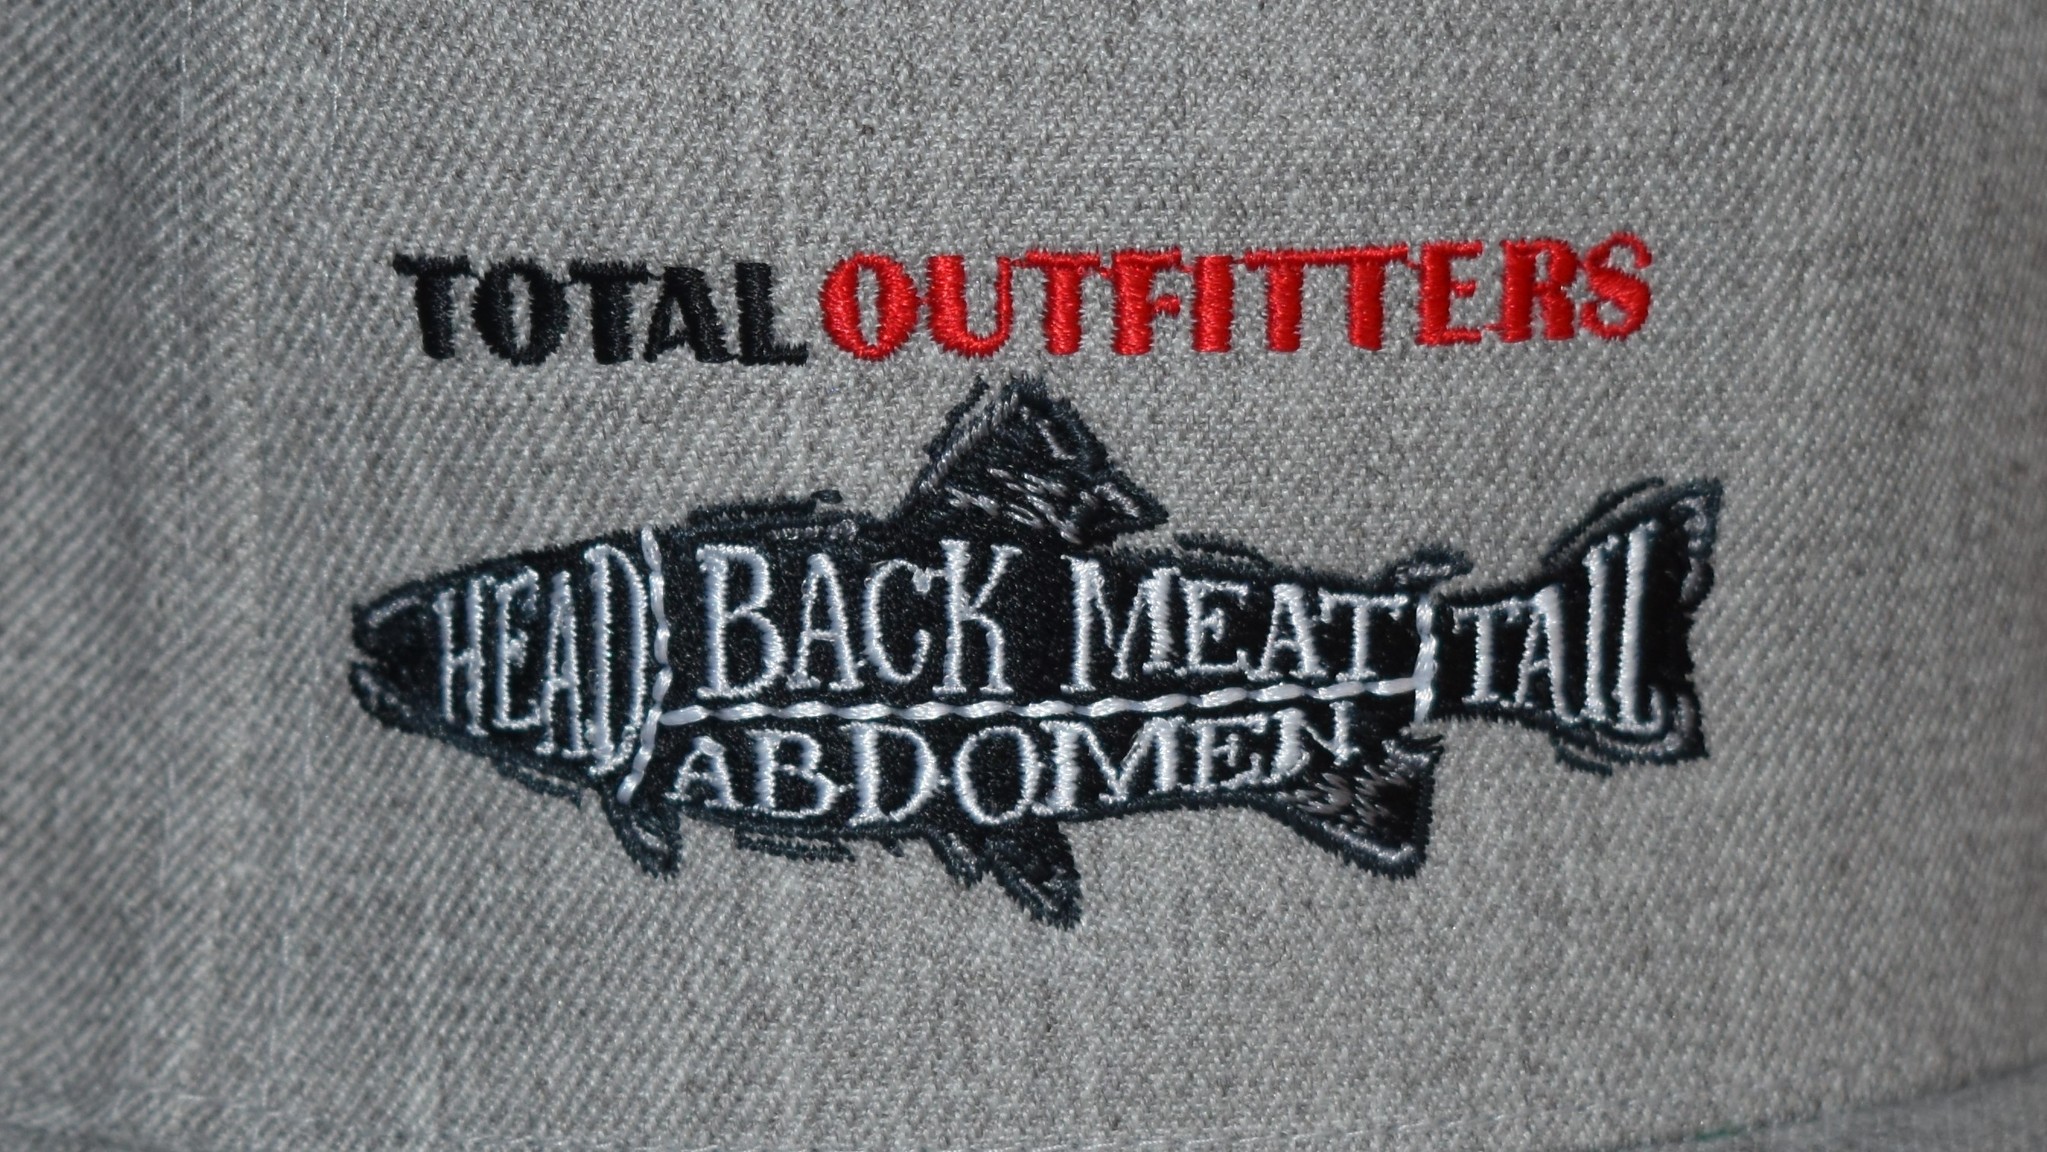 TOTAL OUTFITTERS